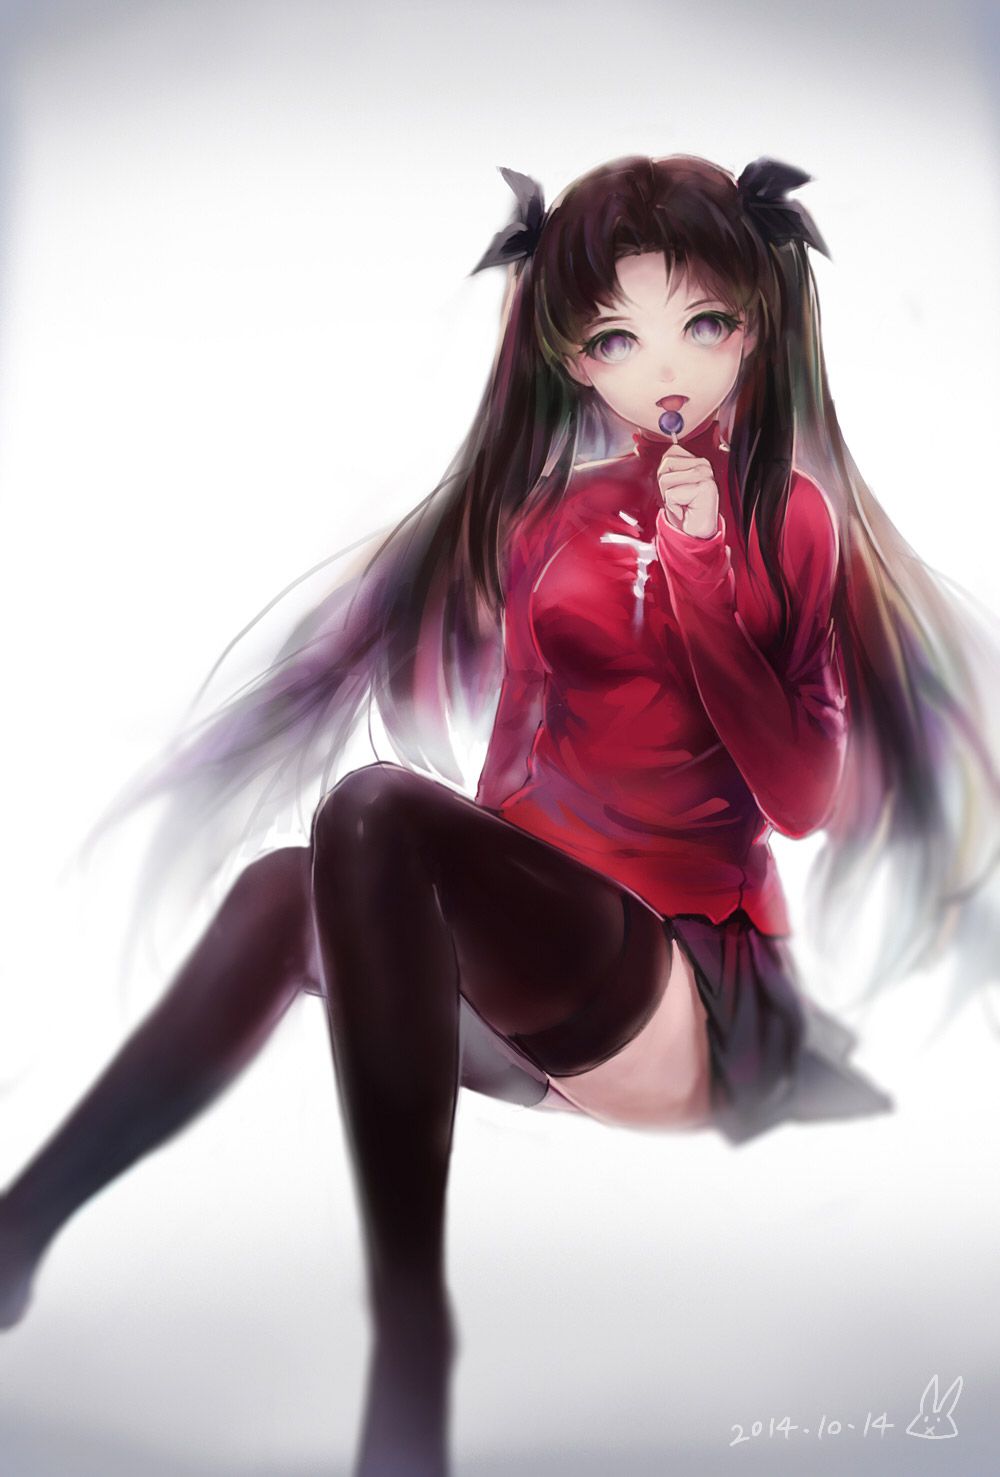 2D-fate/stay night tohsaka Rin-Chan prpr erotic pictures 68 photos 24